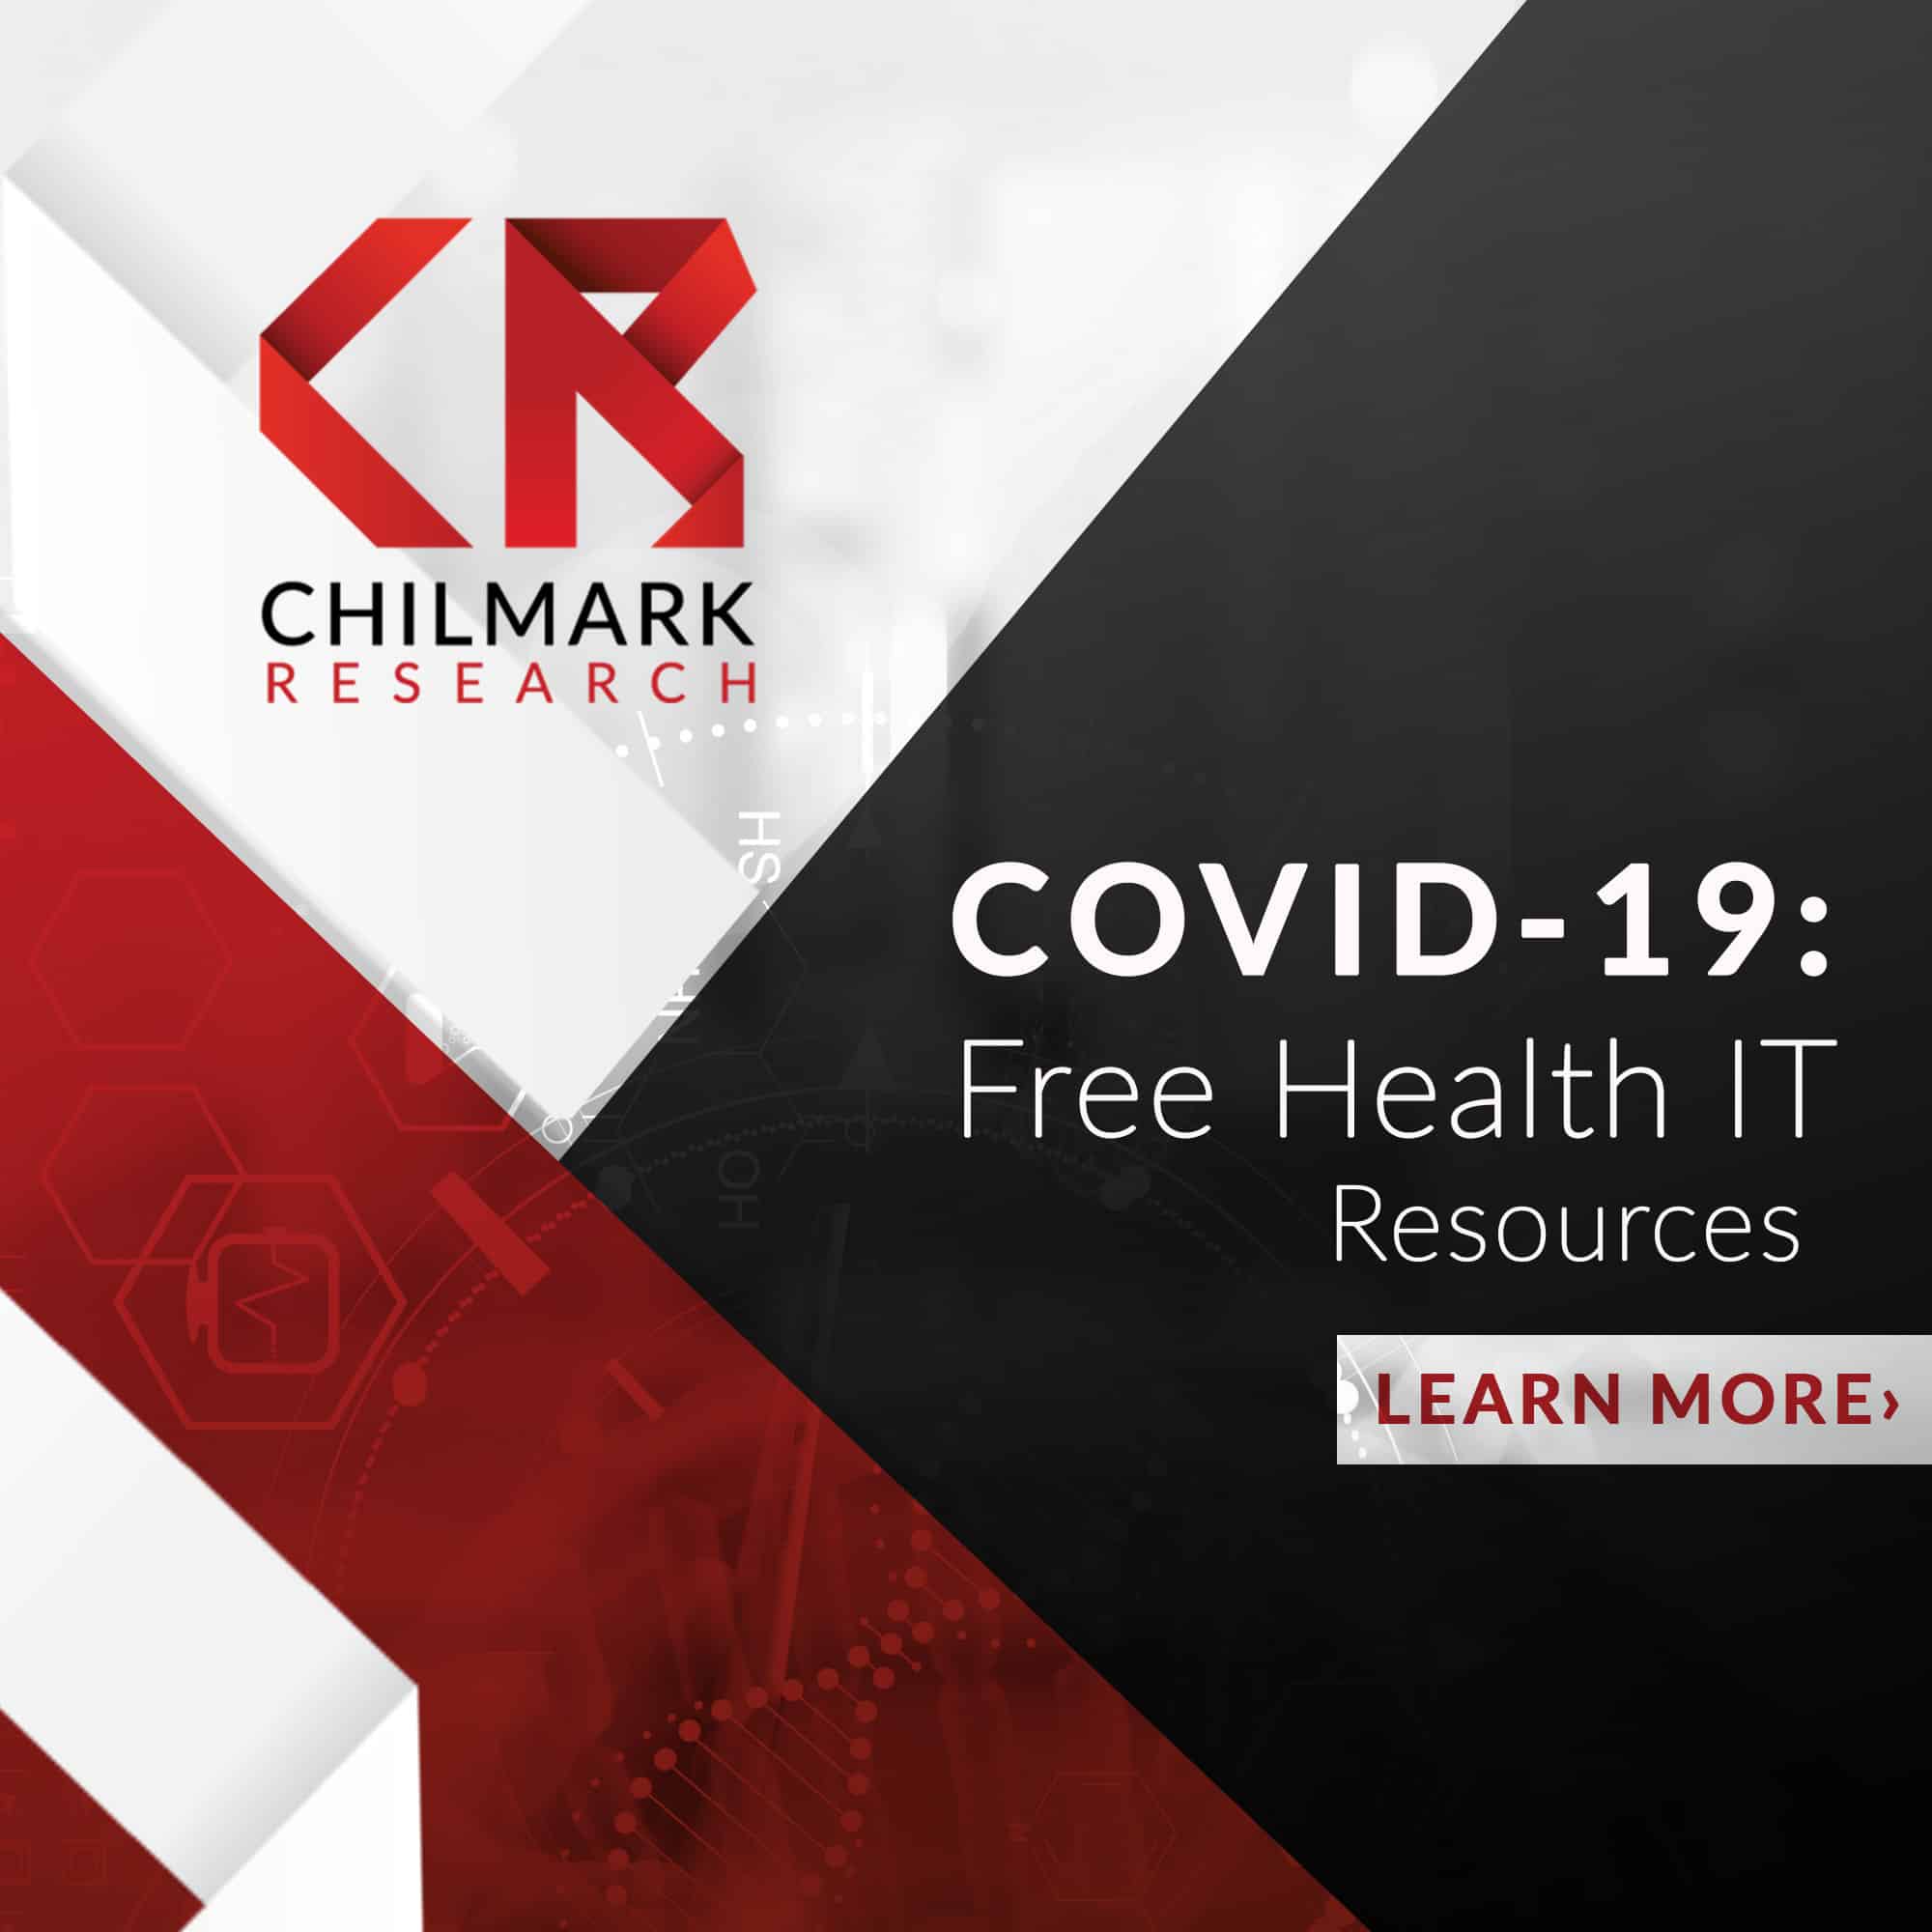 COVID-19: Free Health IT Resources